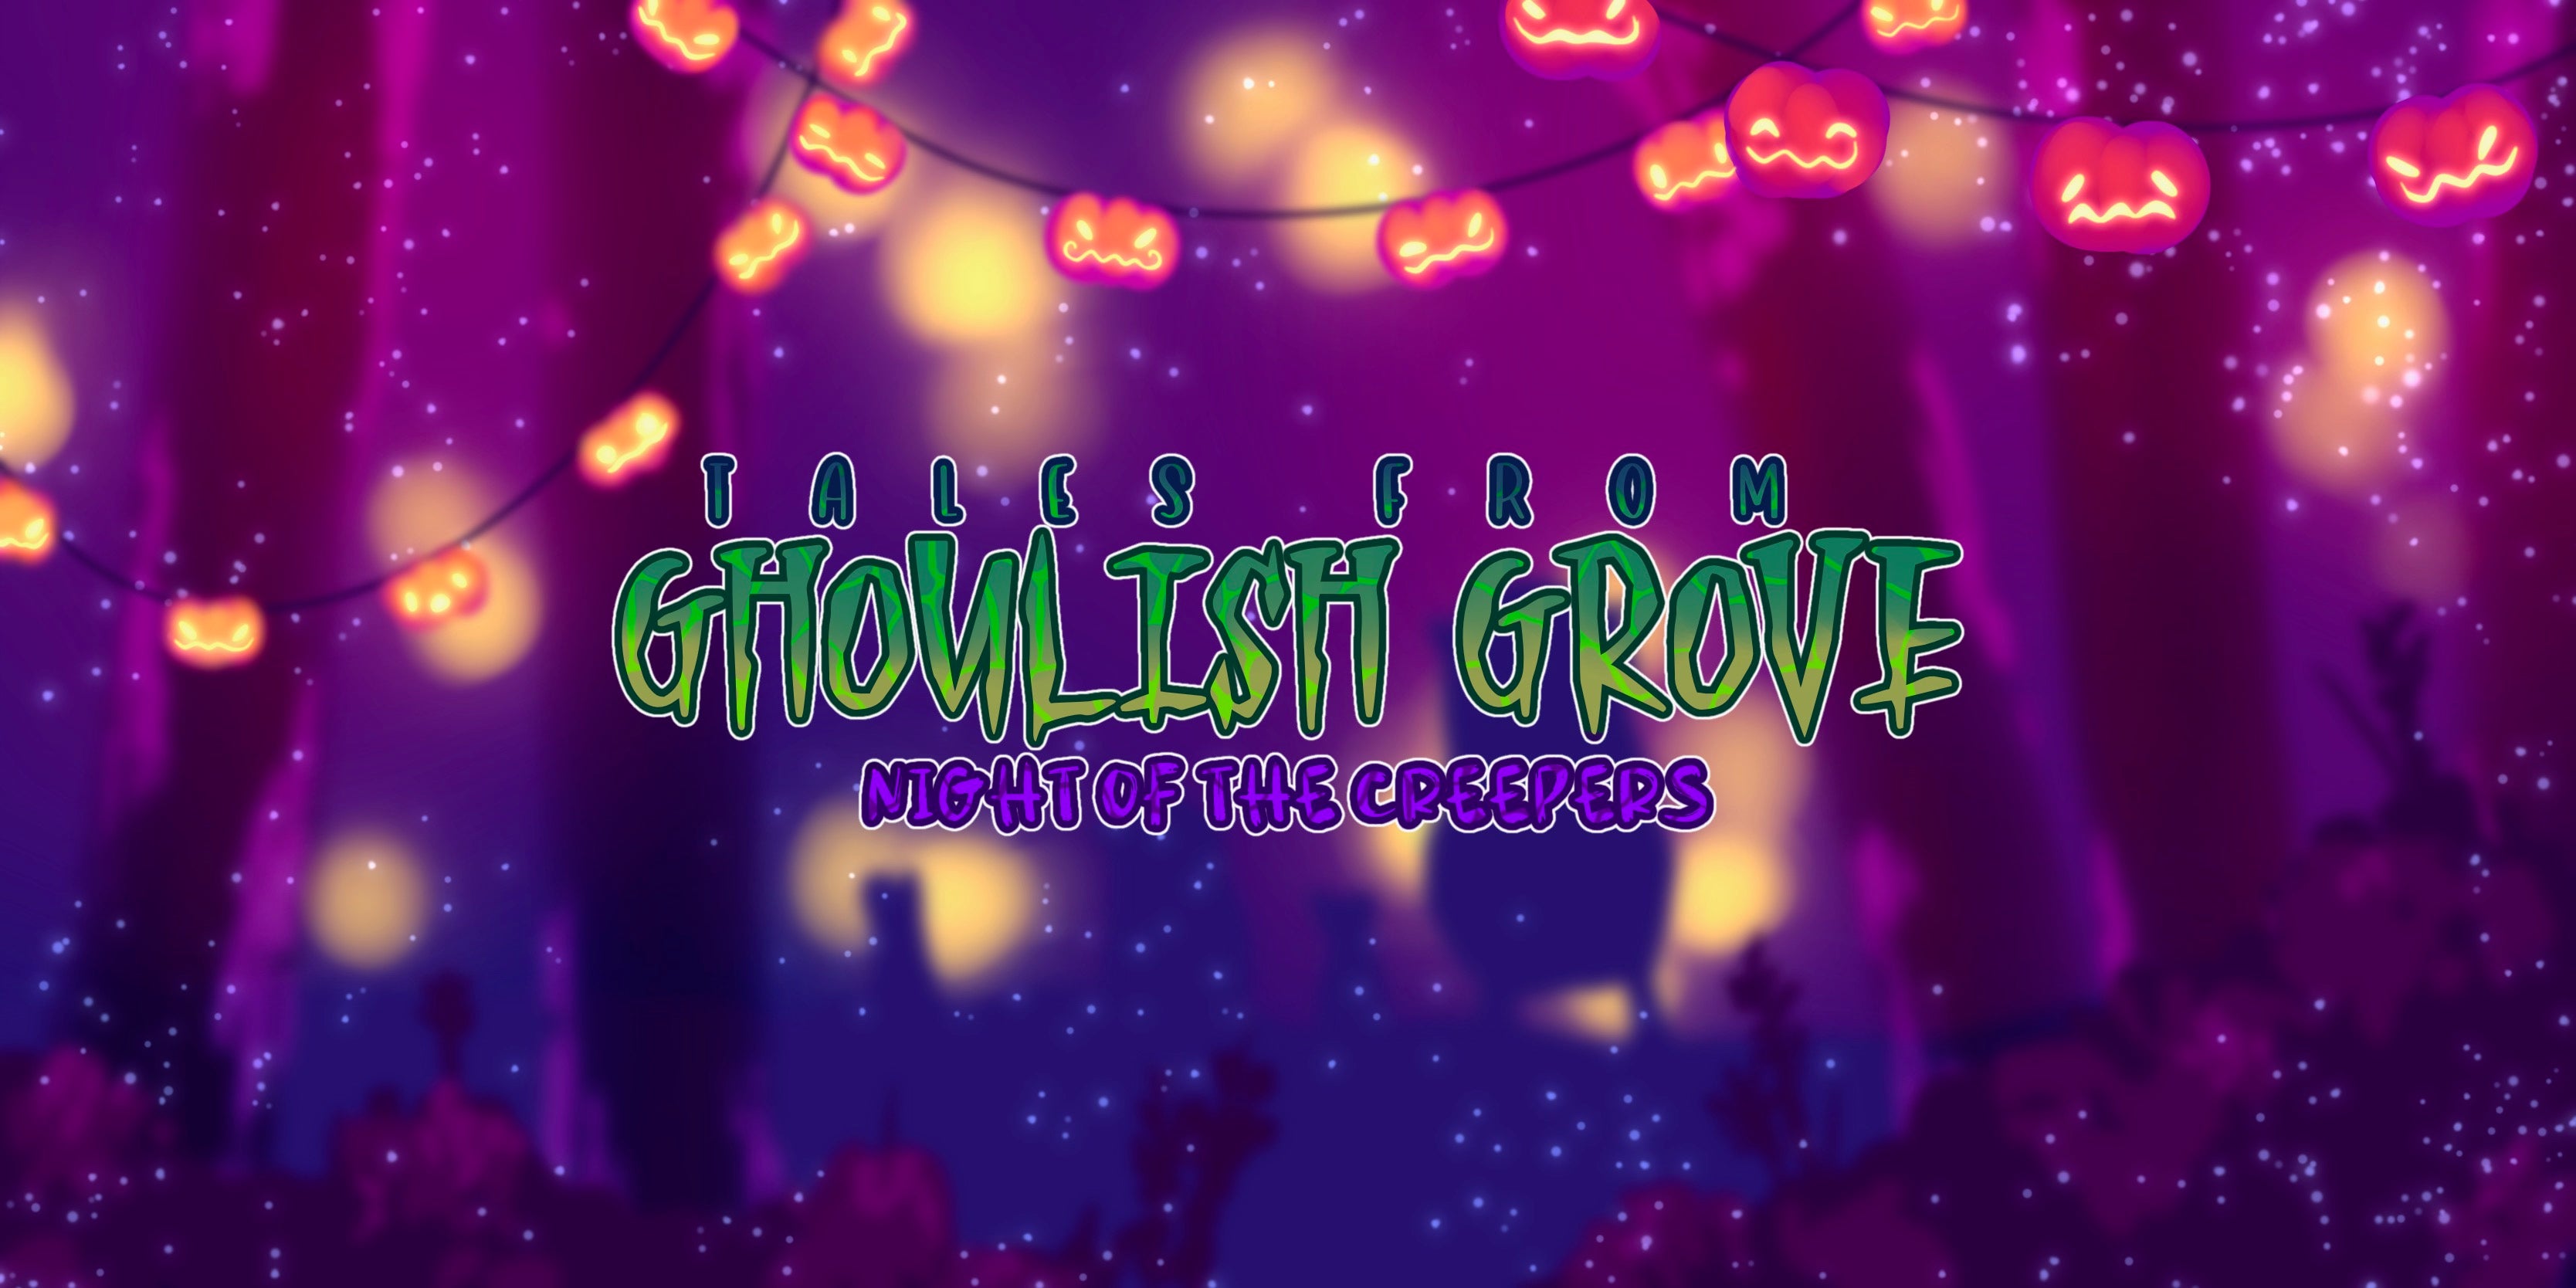 Ghoulish Grove: Night of the Creepers – Moonmilk and Monsters